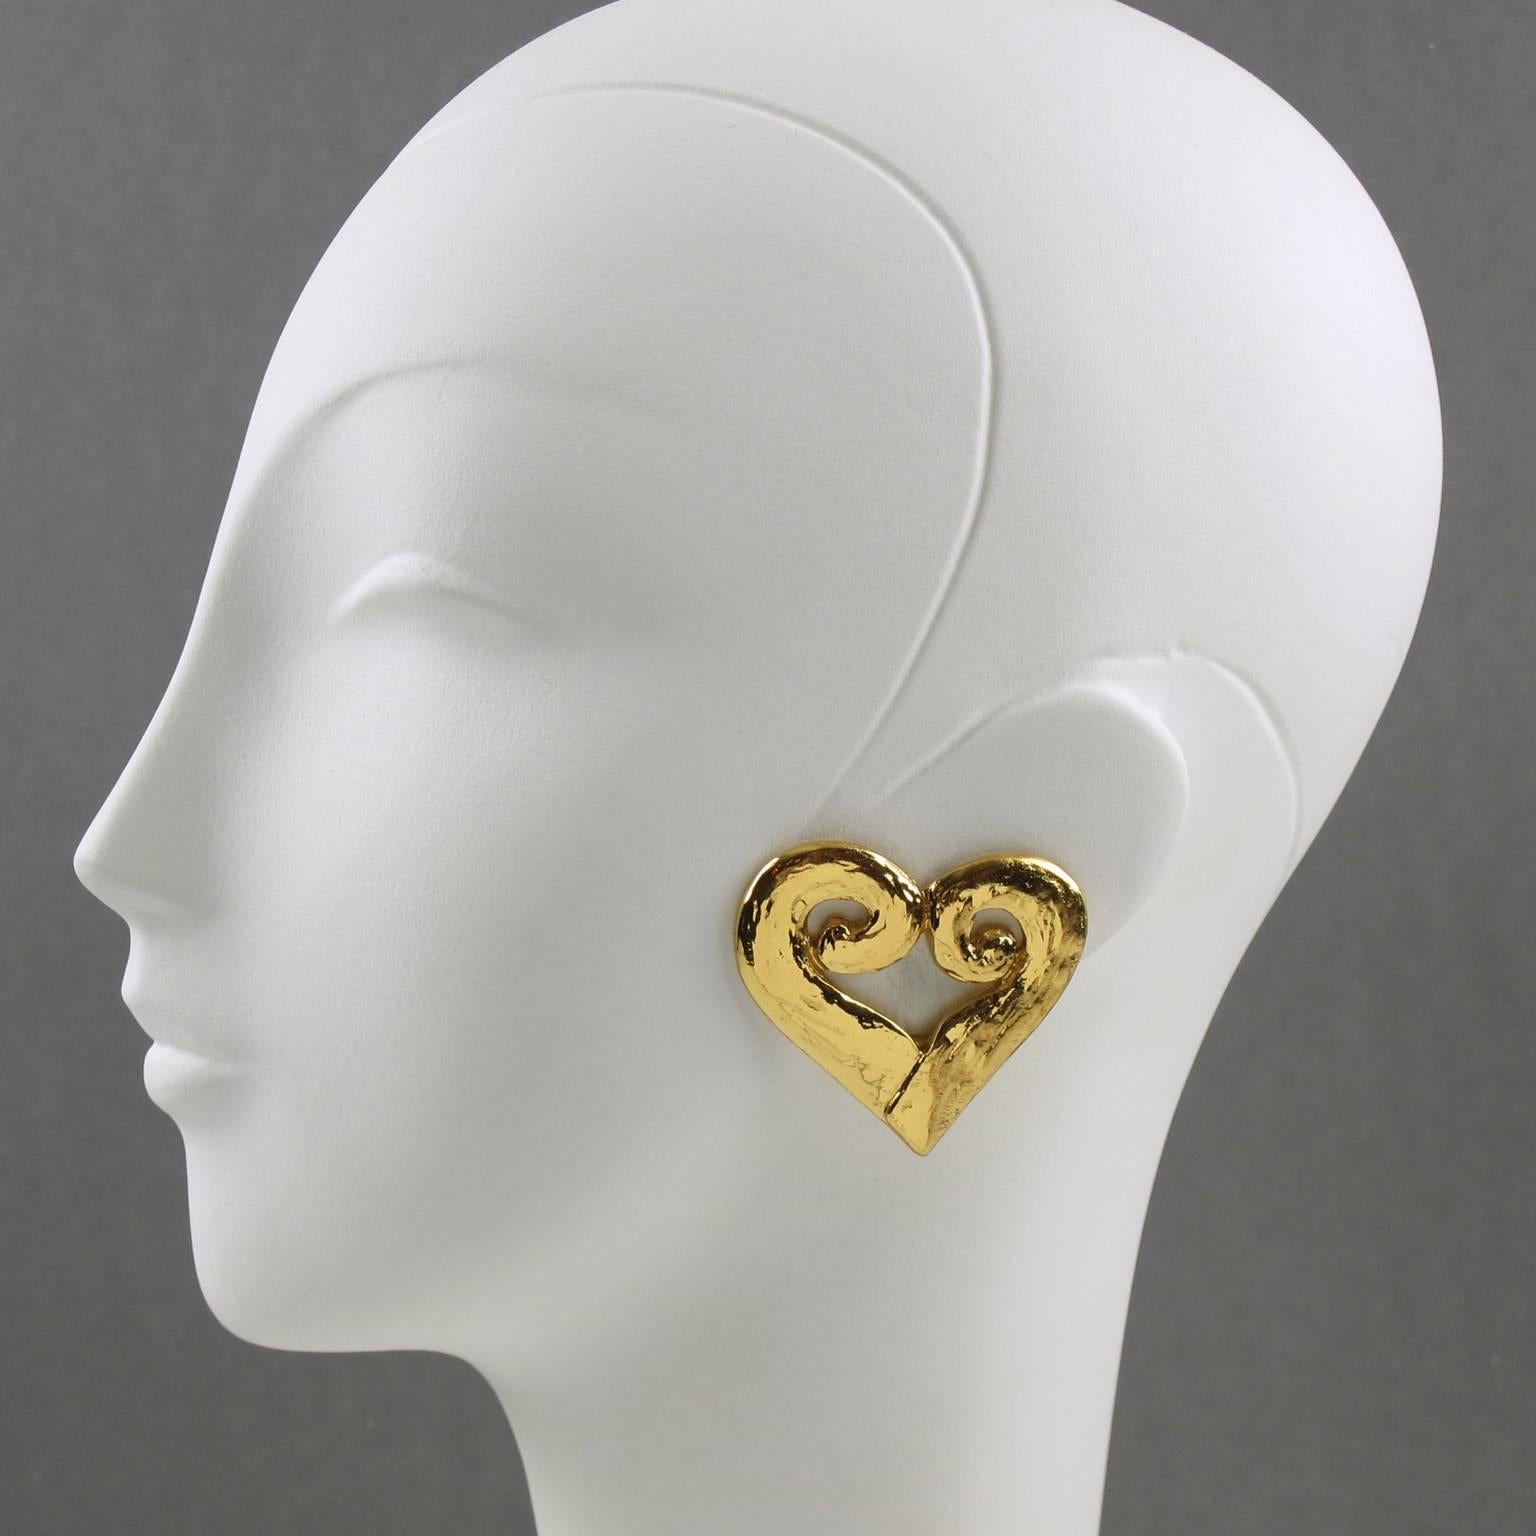 Vintage Yves Saint Laurent YSL Paris signed clip on earrings. Featuring lovely oversized gilt metal heart all carved and pierced with metal all textured. Marking underside with YSL logo pierced on clip and YSL Made in France tag logo. Excellent